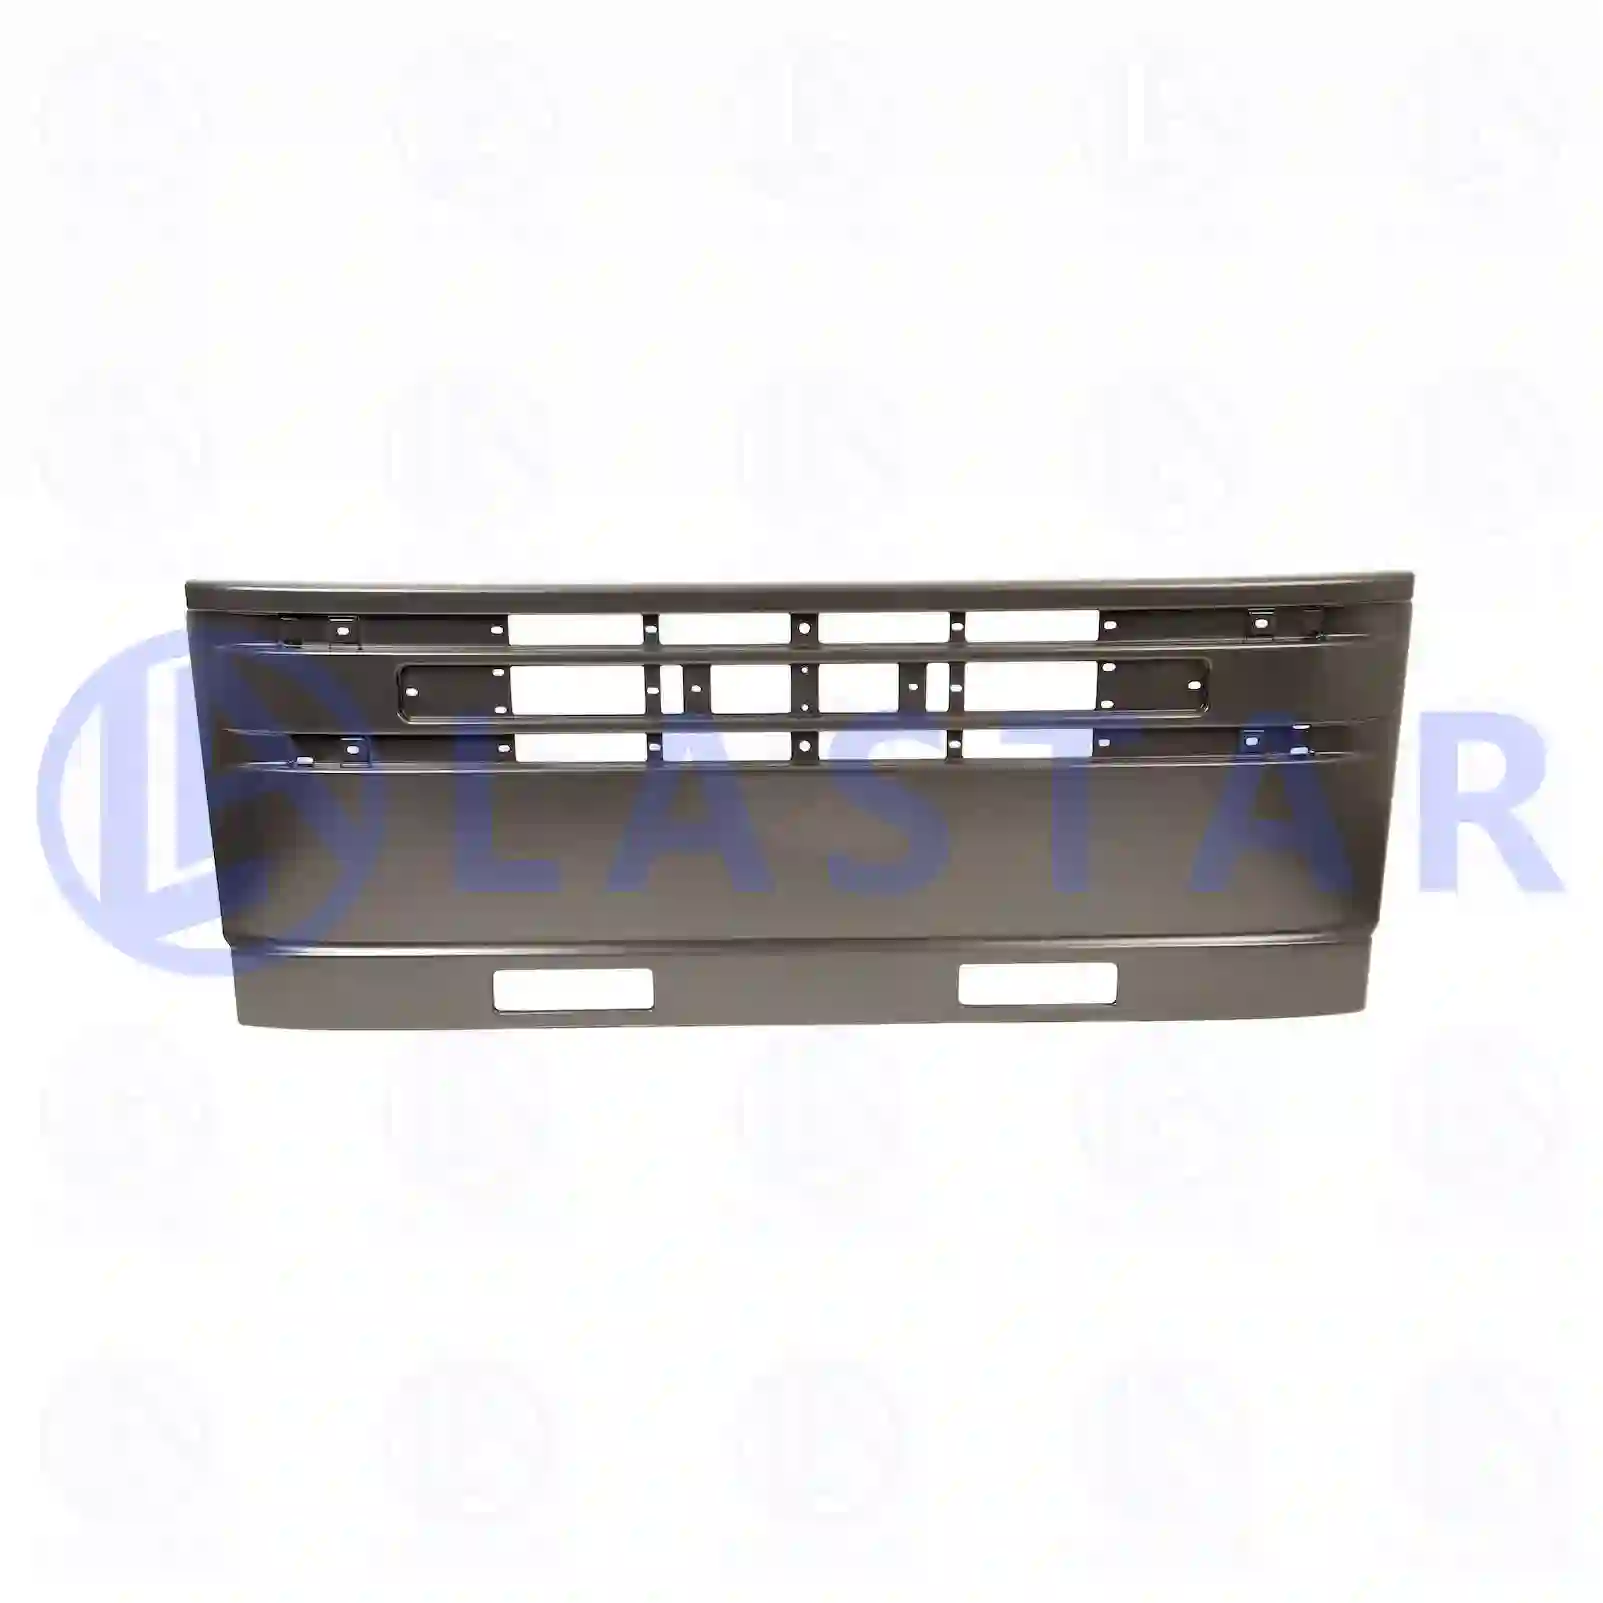 Front grill, 77720705, 08143891, 504111690, 8143891 ||  77720705 Lastar Spare Part | Truck Spare Parts, Auotomotive Spare Parts Front grill, 77720705, 08143891, 504111690, 8143891 ||  77720705 Lastar Spare Part | Truck Spare Parts, Auotomotive Spare Parts